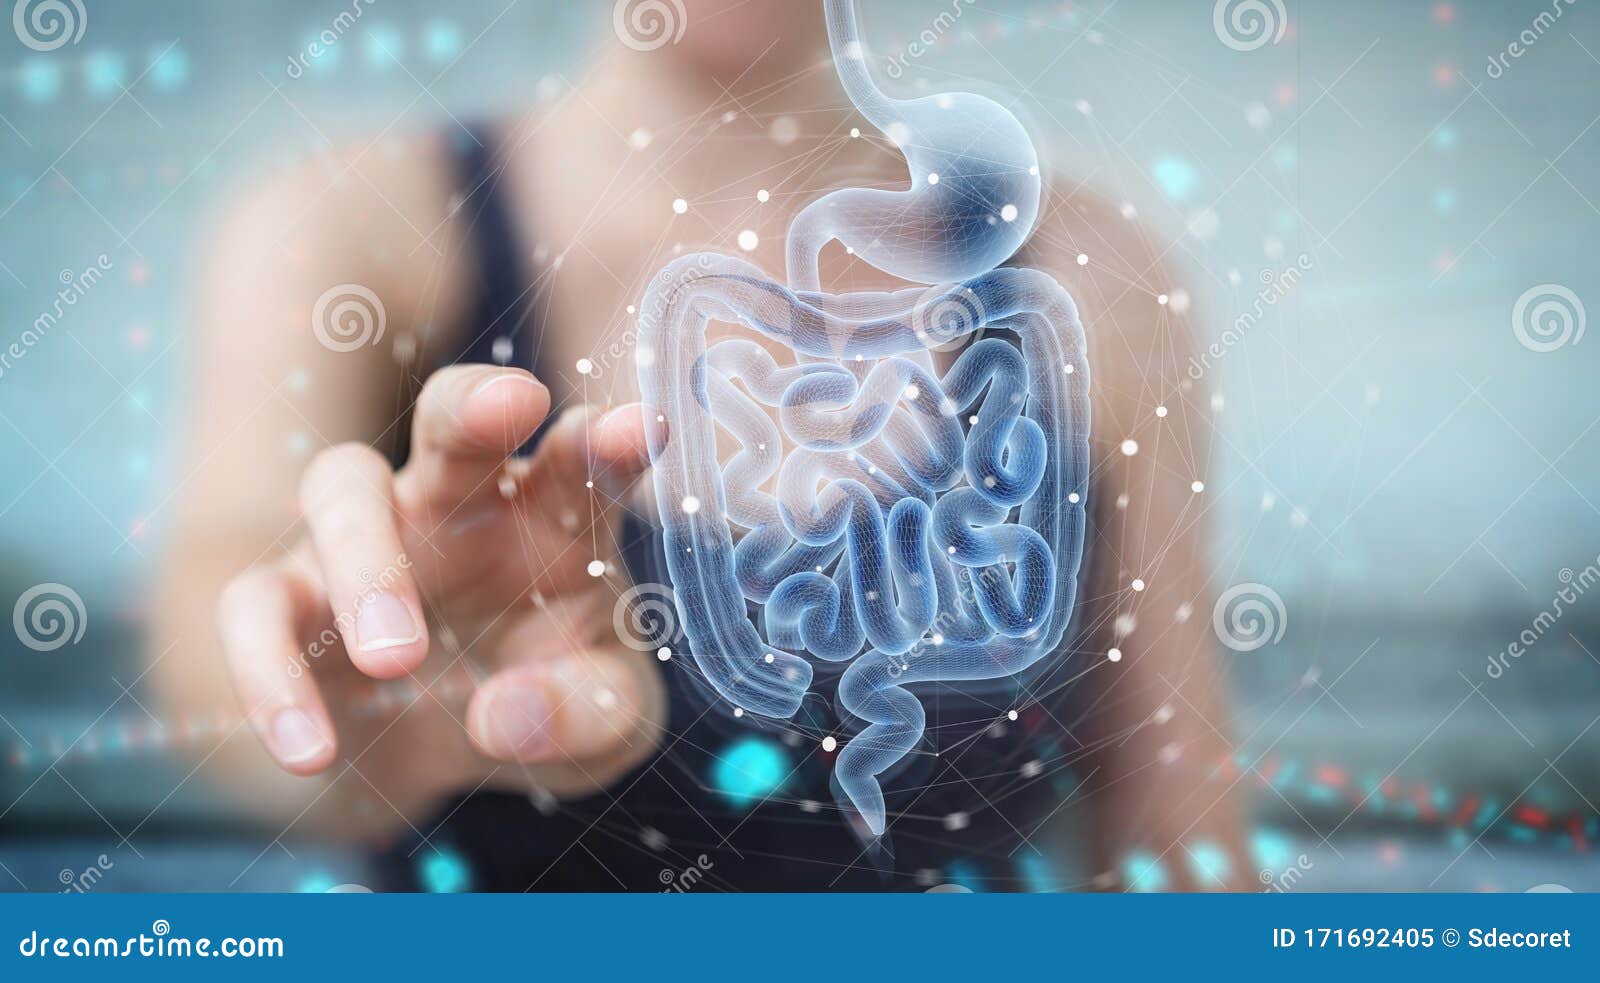 woman using digital x-ray of human intestine holographic scan projection 3d rendering